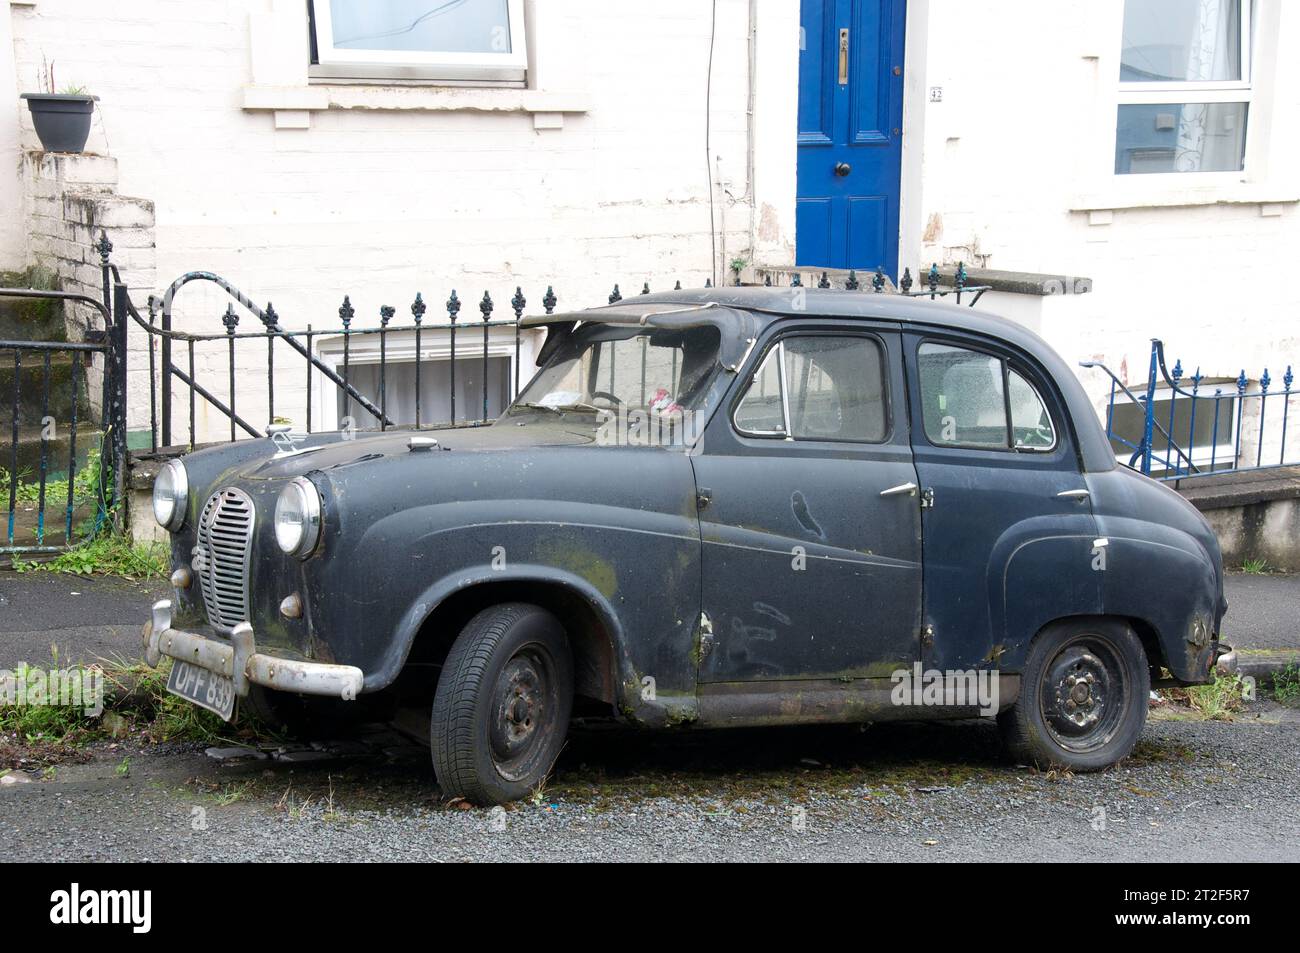 Dilapidated old black 1955 A30 Austin seven, four door saloon, classic motor car. Left neglected in a Bristol backstreet. England, United Kingdom, UK. Stock Photo